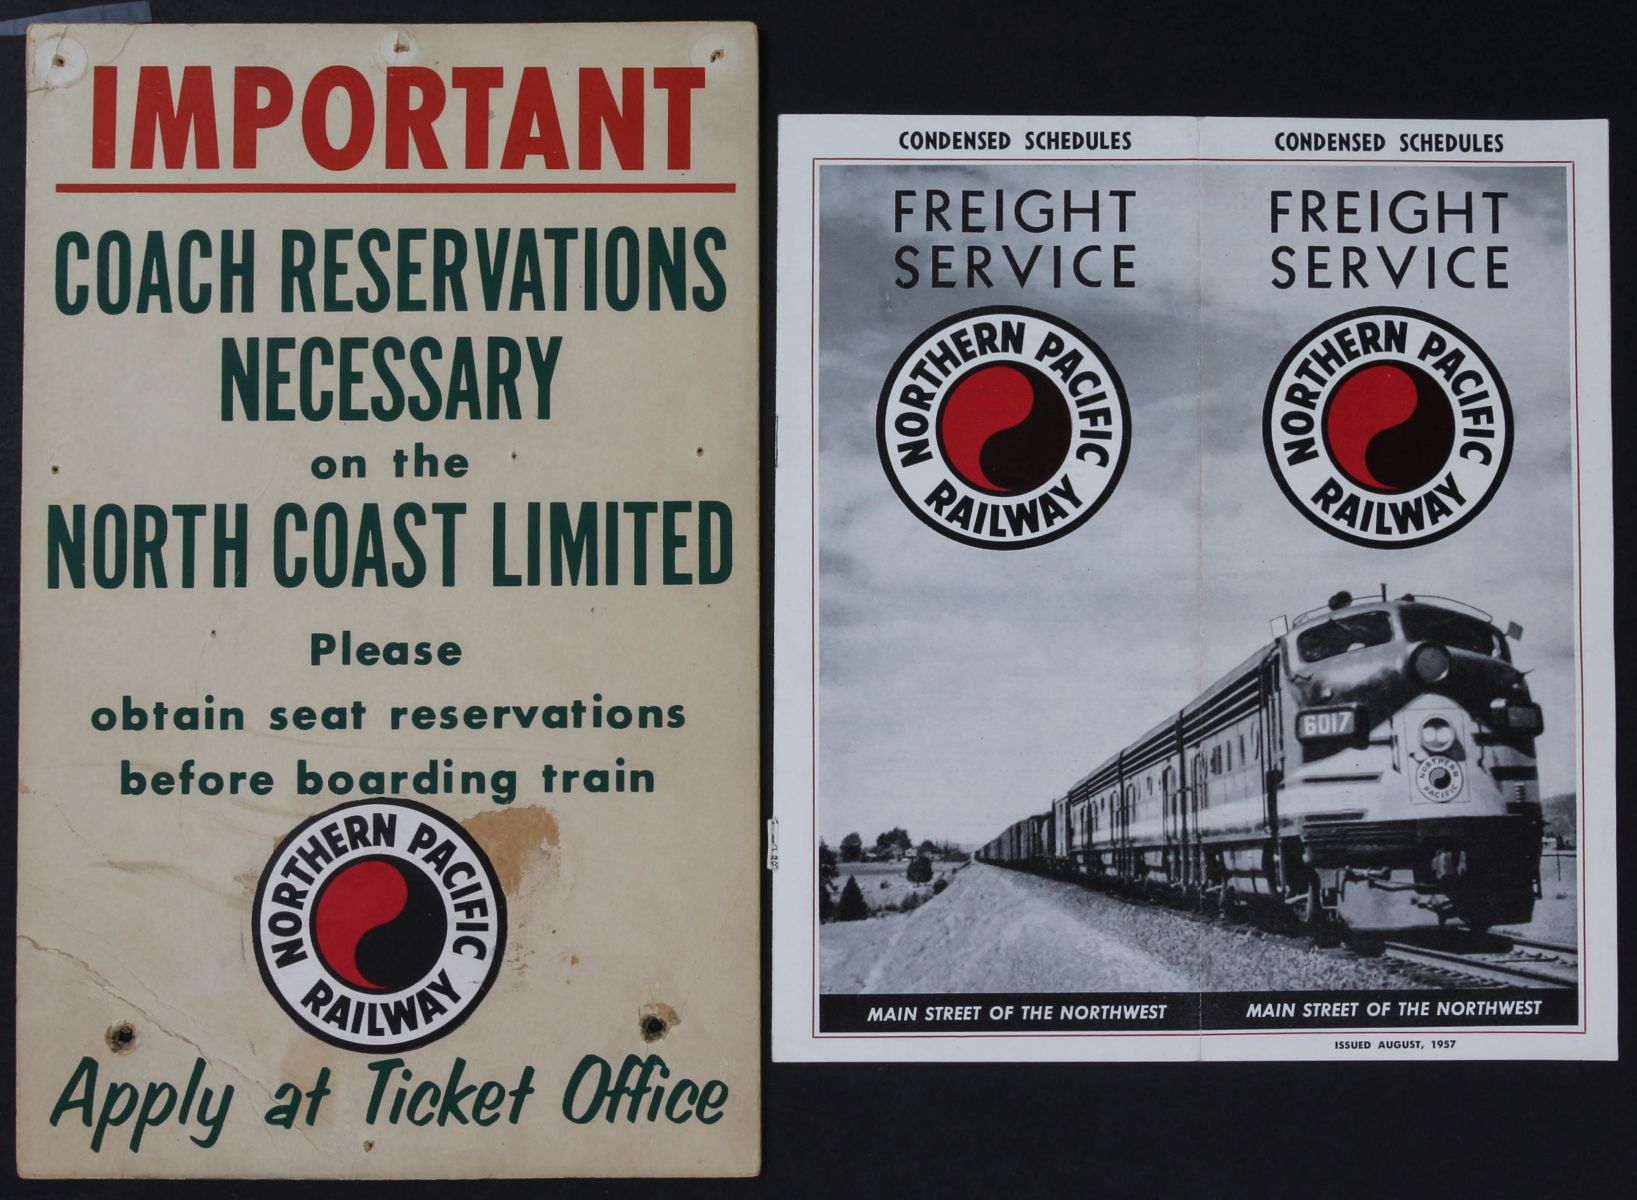 A COLLECTION OF NORTHERN PACIFIC RAILROAD EPHEMERA